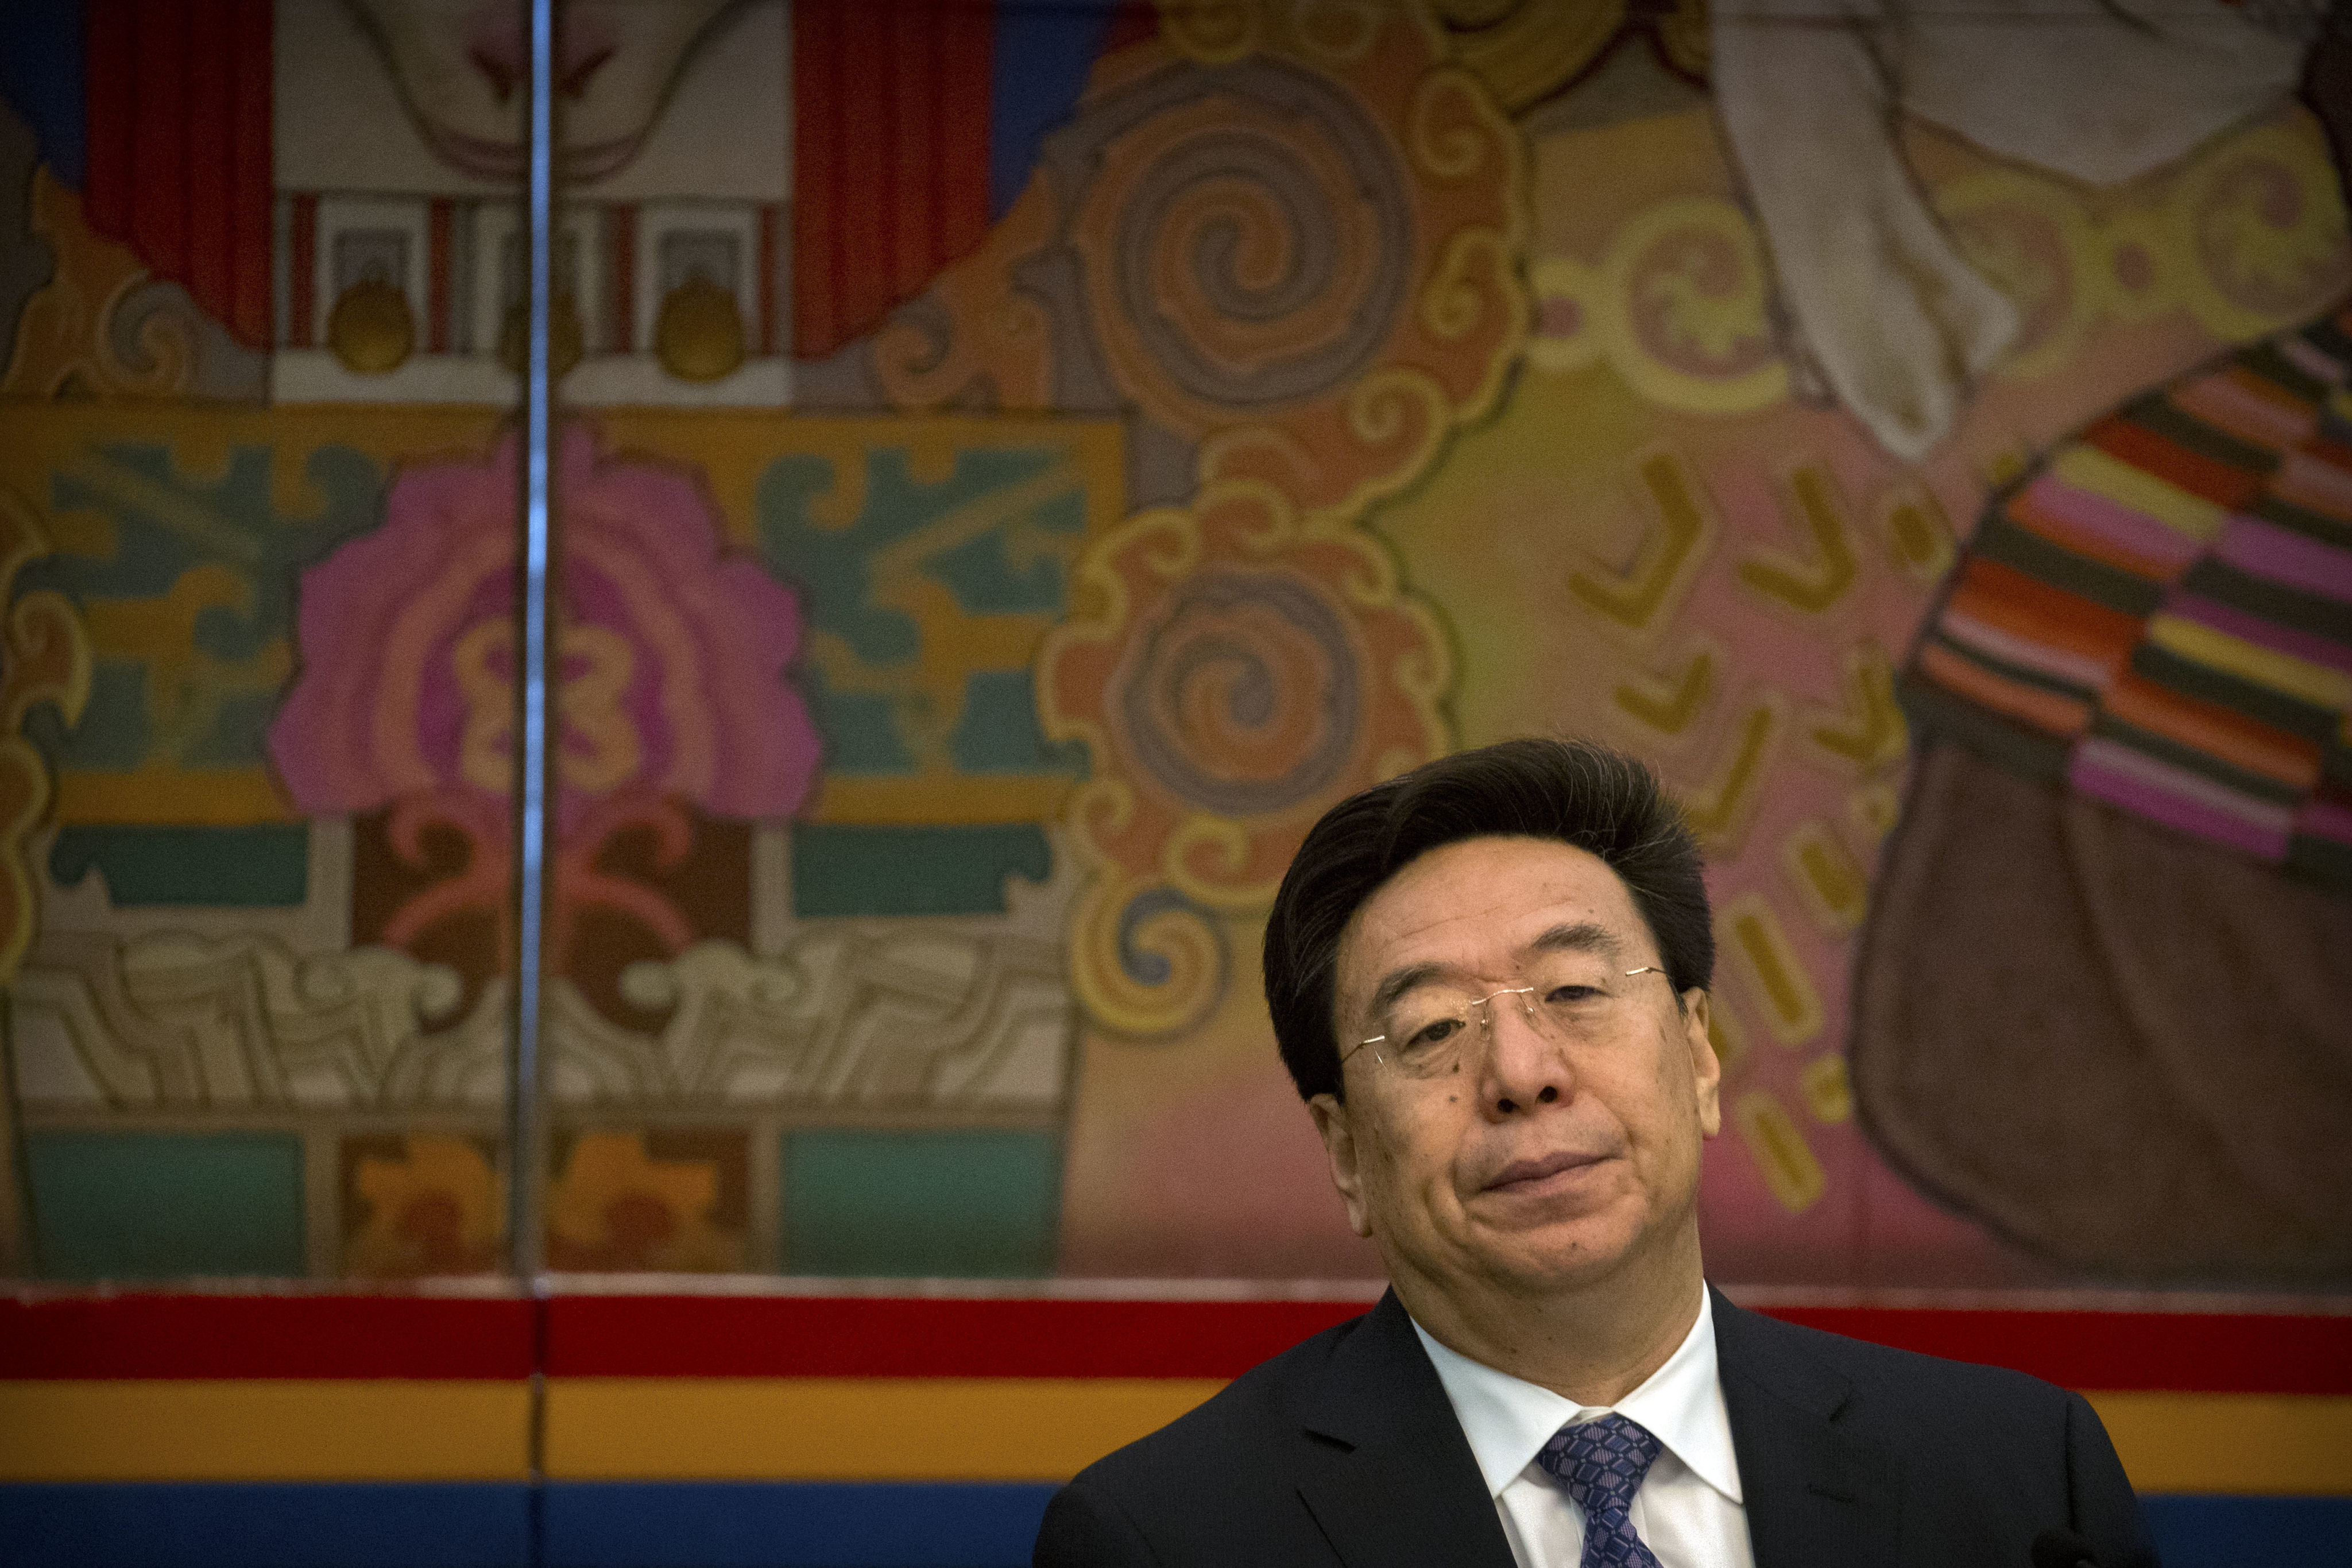 Wu Yingjie, who spent 47 years in Tibet, including a five-year stint as the region’s top official, is now being investigated for “serious violations of discipline and laws” by China’s anti-corruption authorities. Photo: AP